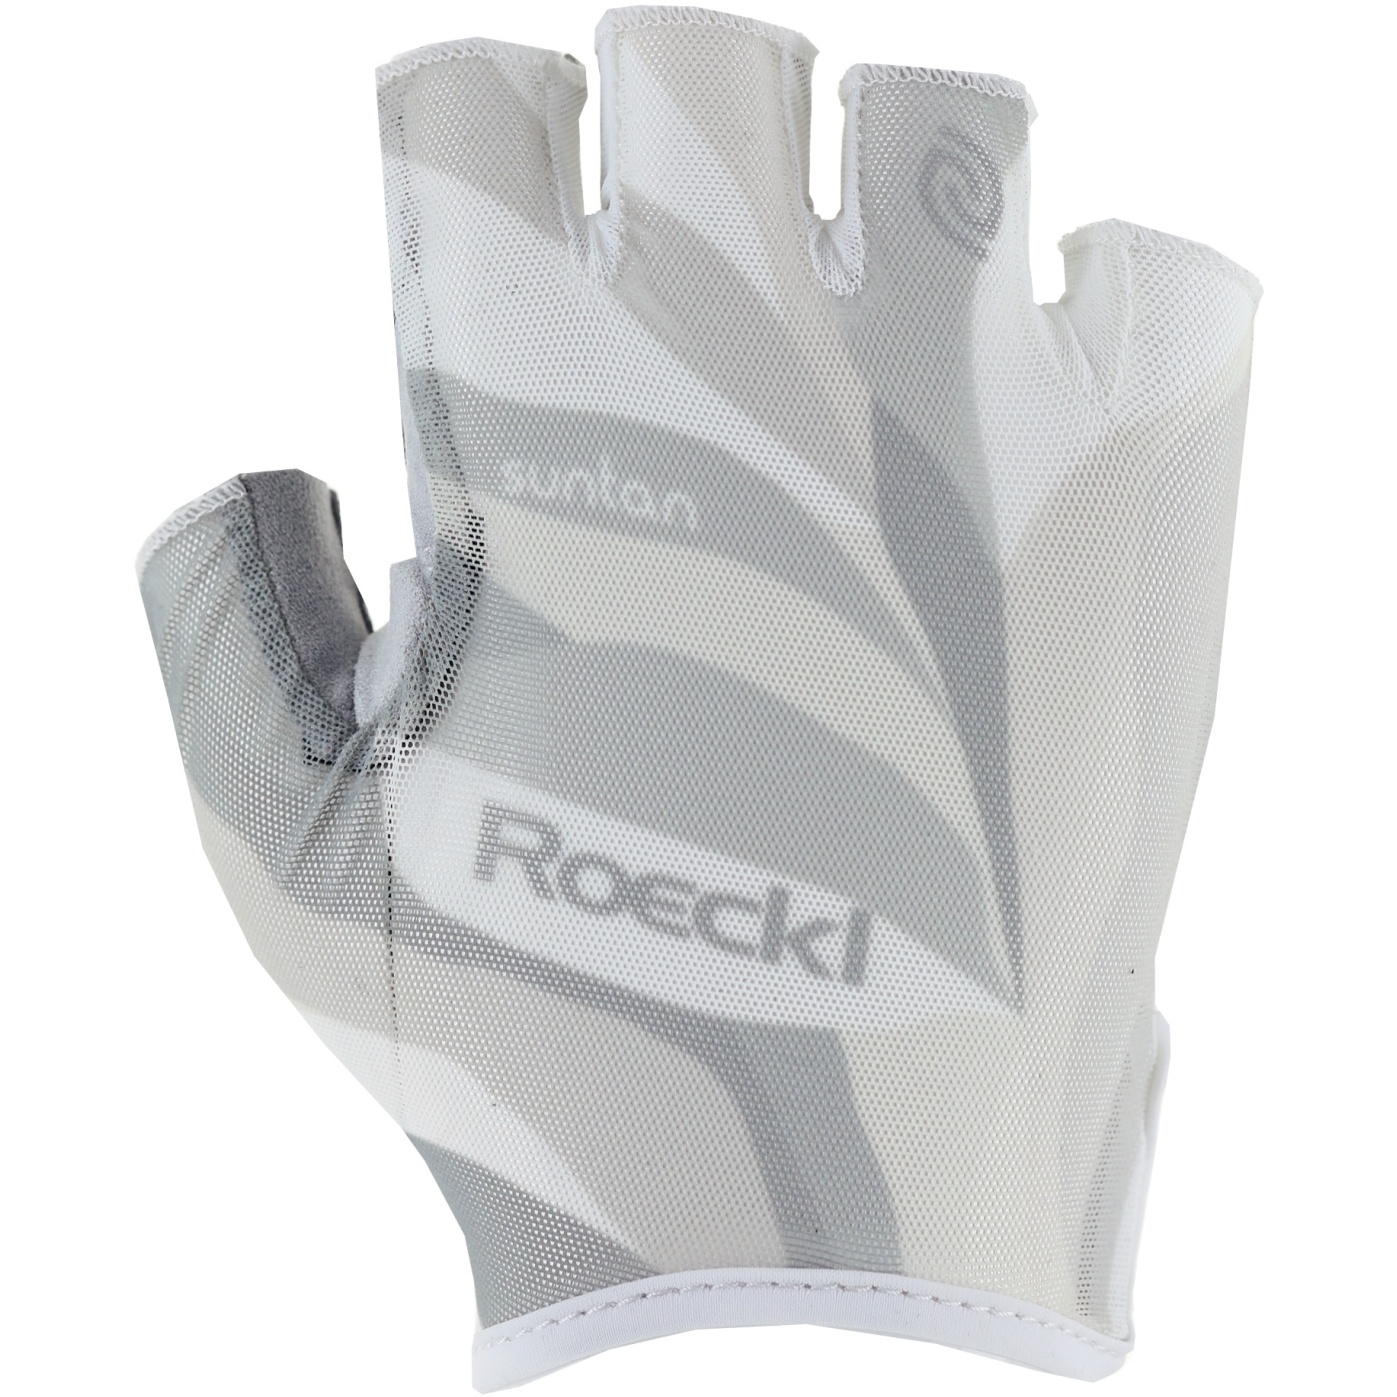 Picture of Roeckl Sports Ibio Cycling Gloves - grey nature 8080